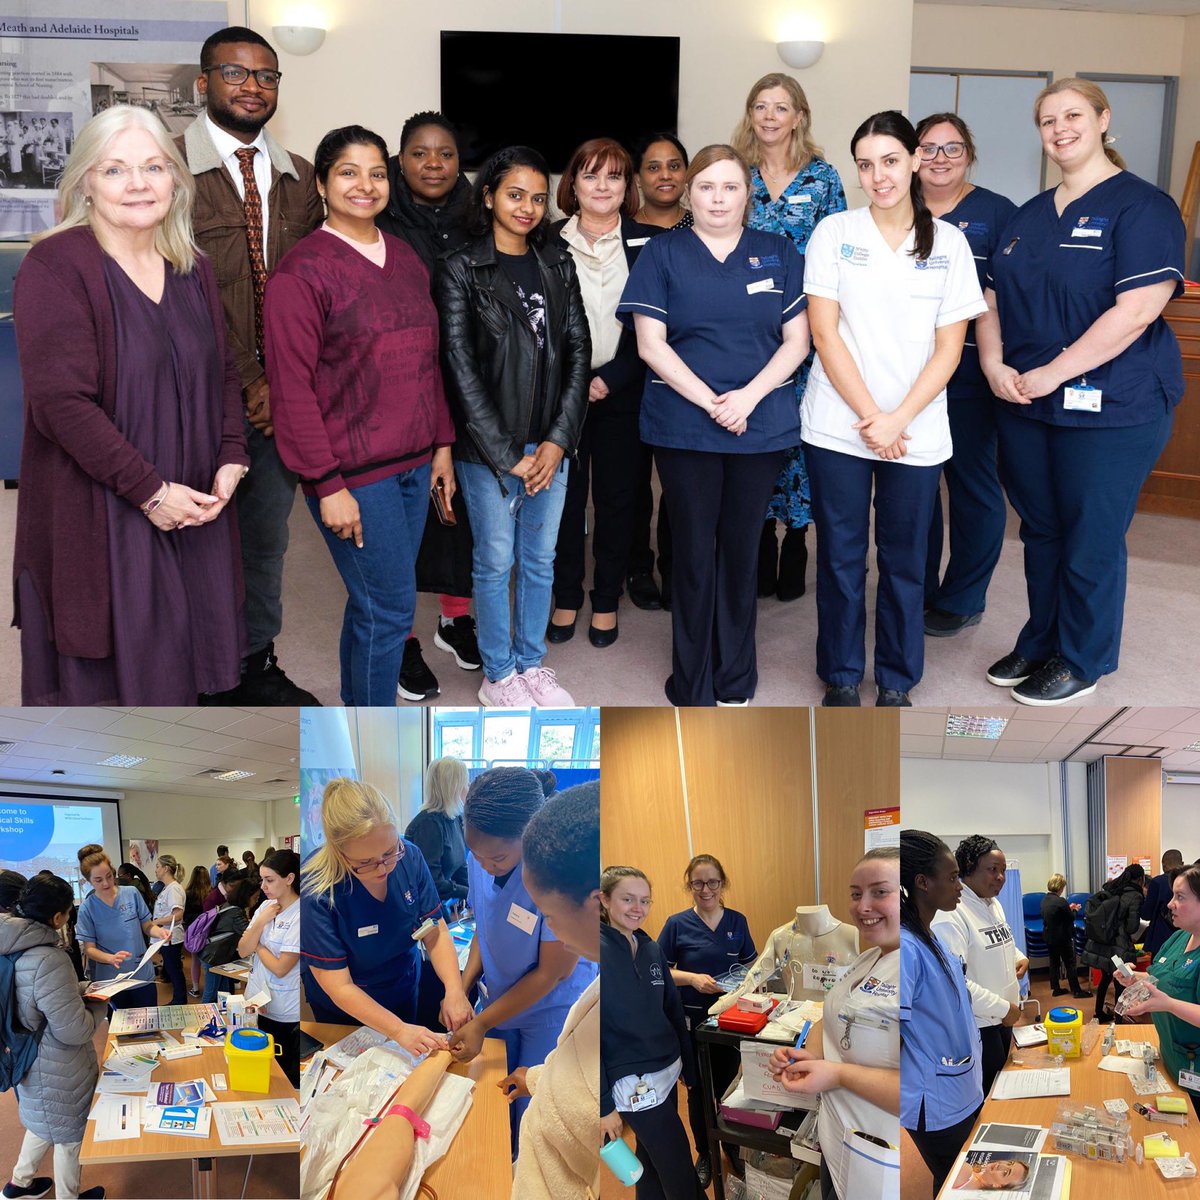 One of @TUH_Tallaght regular clinical skills workshops today with 18 stations demonstrating key clinical skills to our nursing & multidisciplinary colleagues. Many thanks to all colleagues who contributed to another successful event & to our esteemed guests @abrady4 @lulunugent